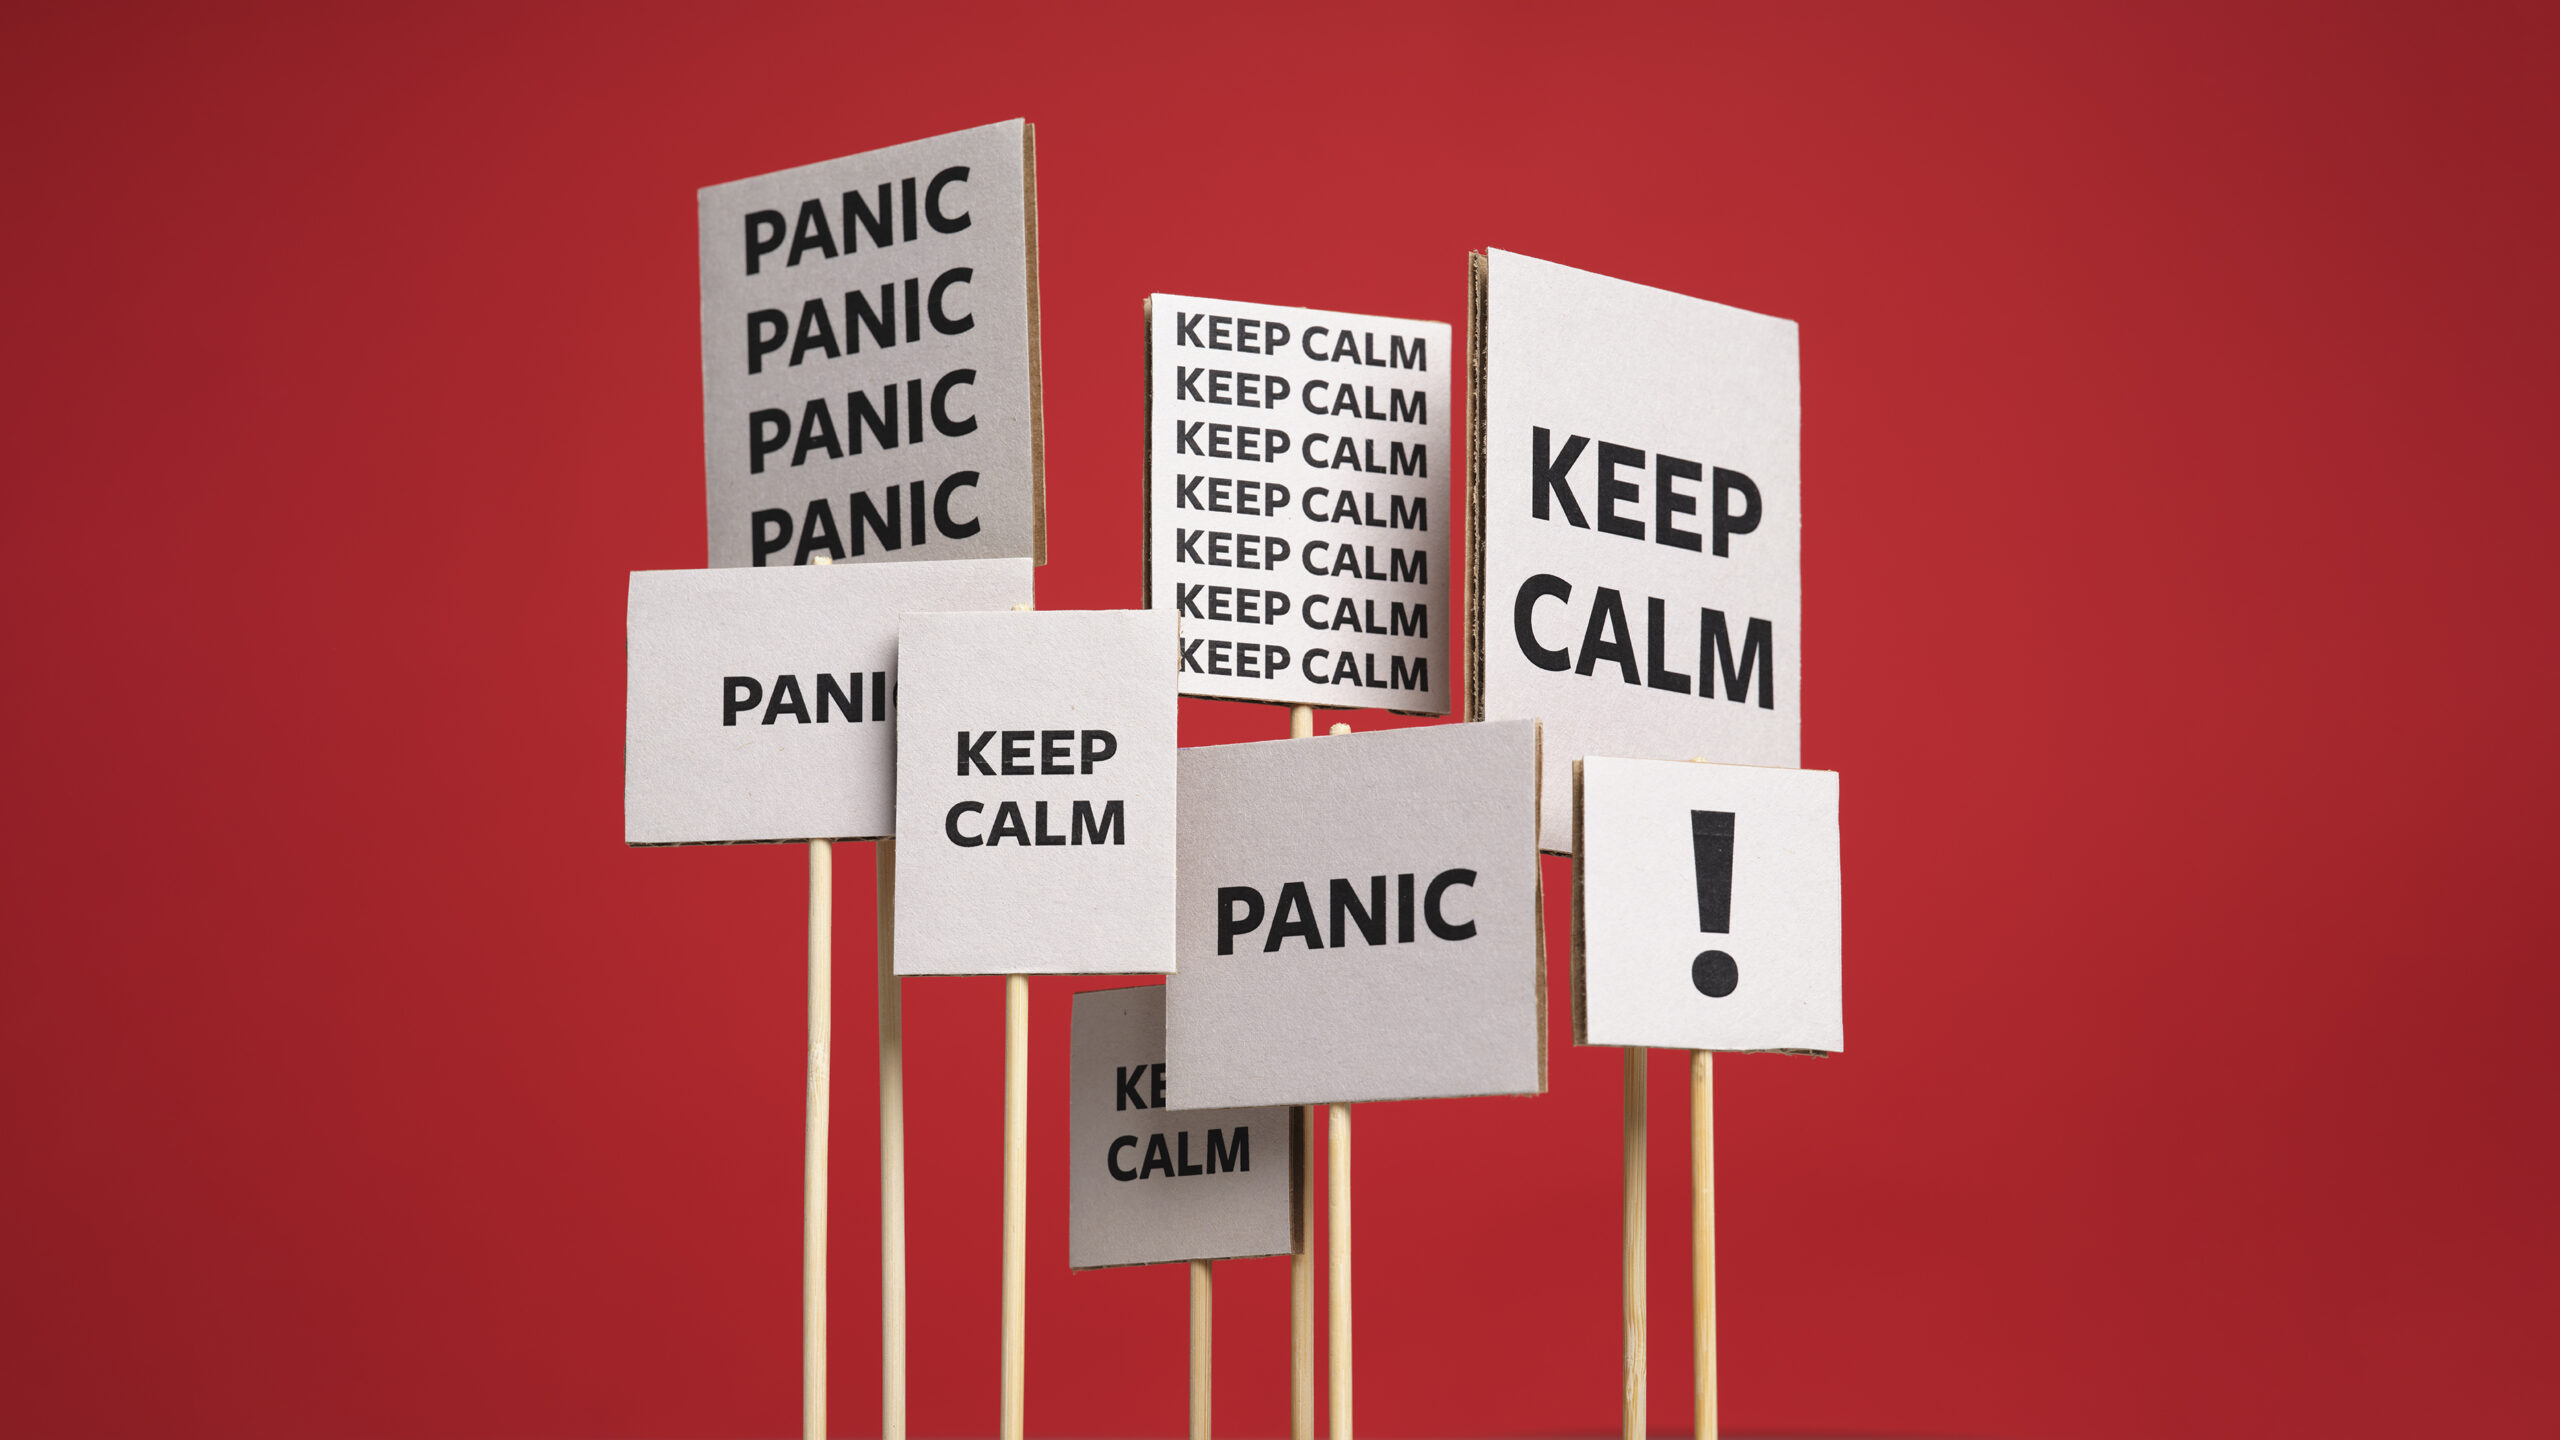 A crowd of placards with the words "Panic" and "Keep Calm" on them, against a red background.